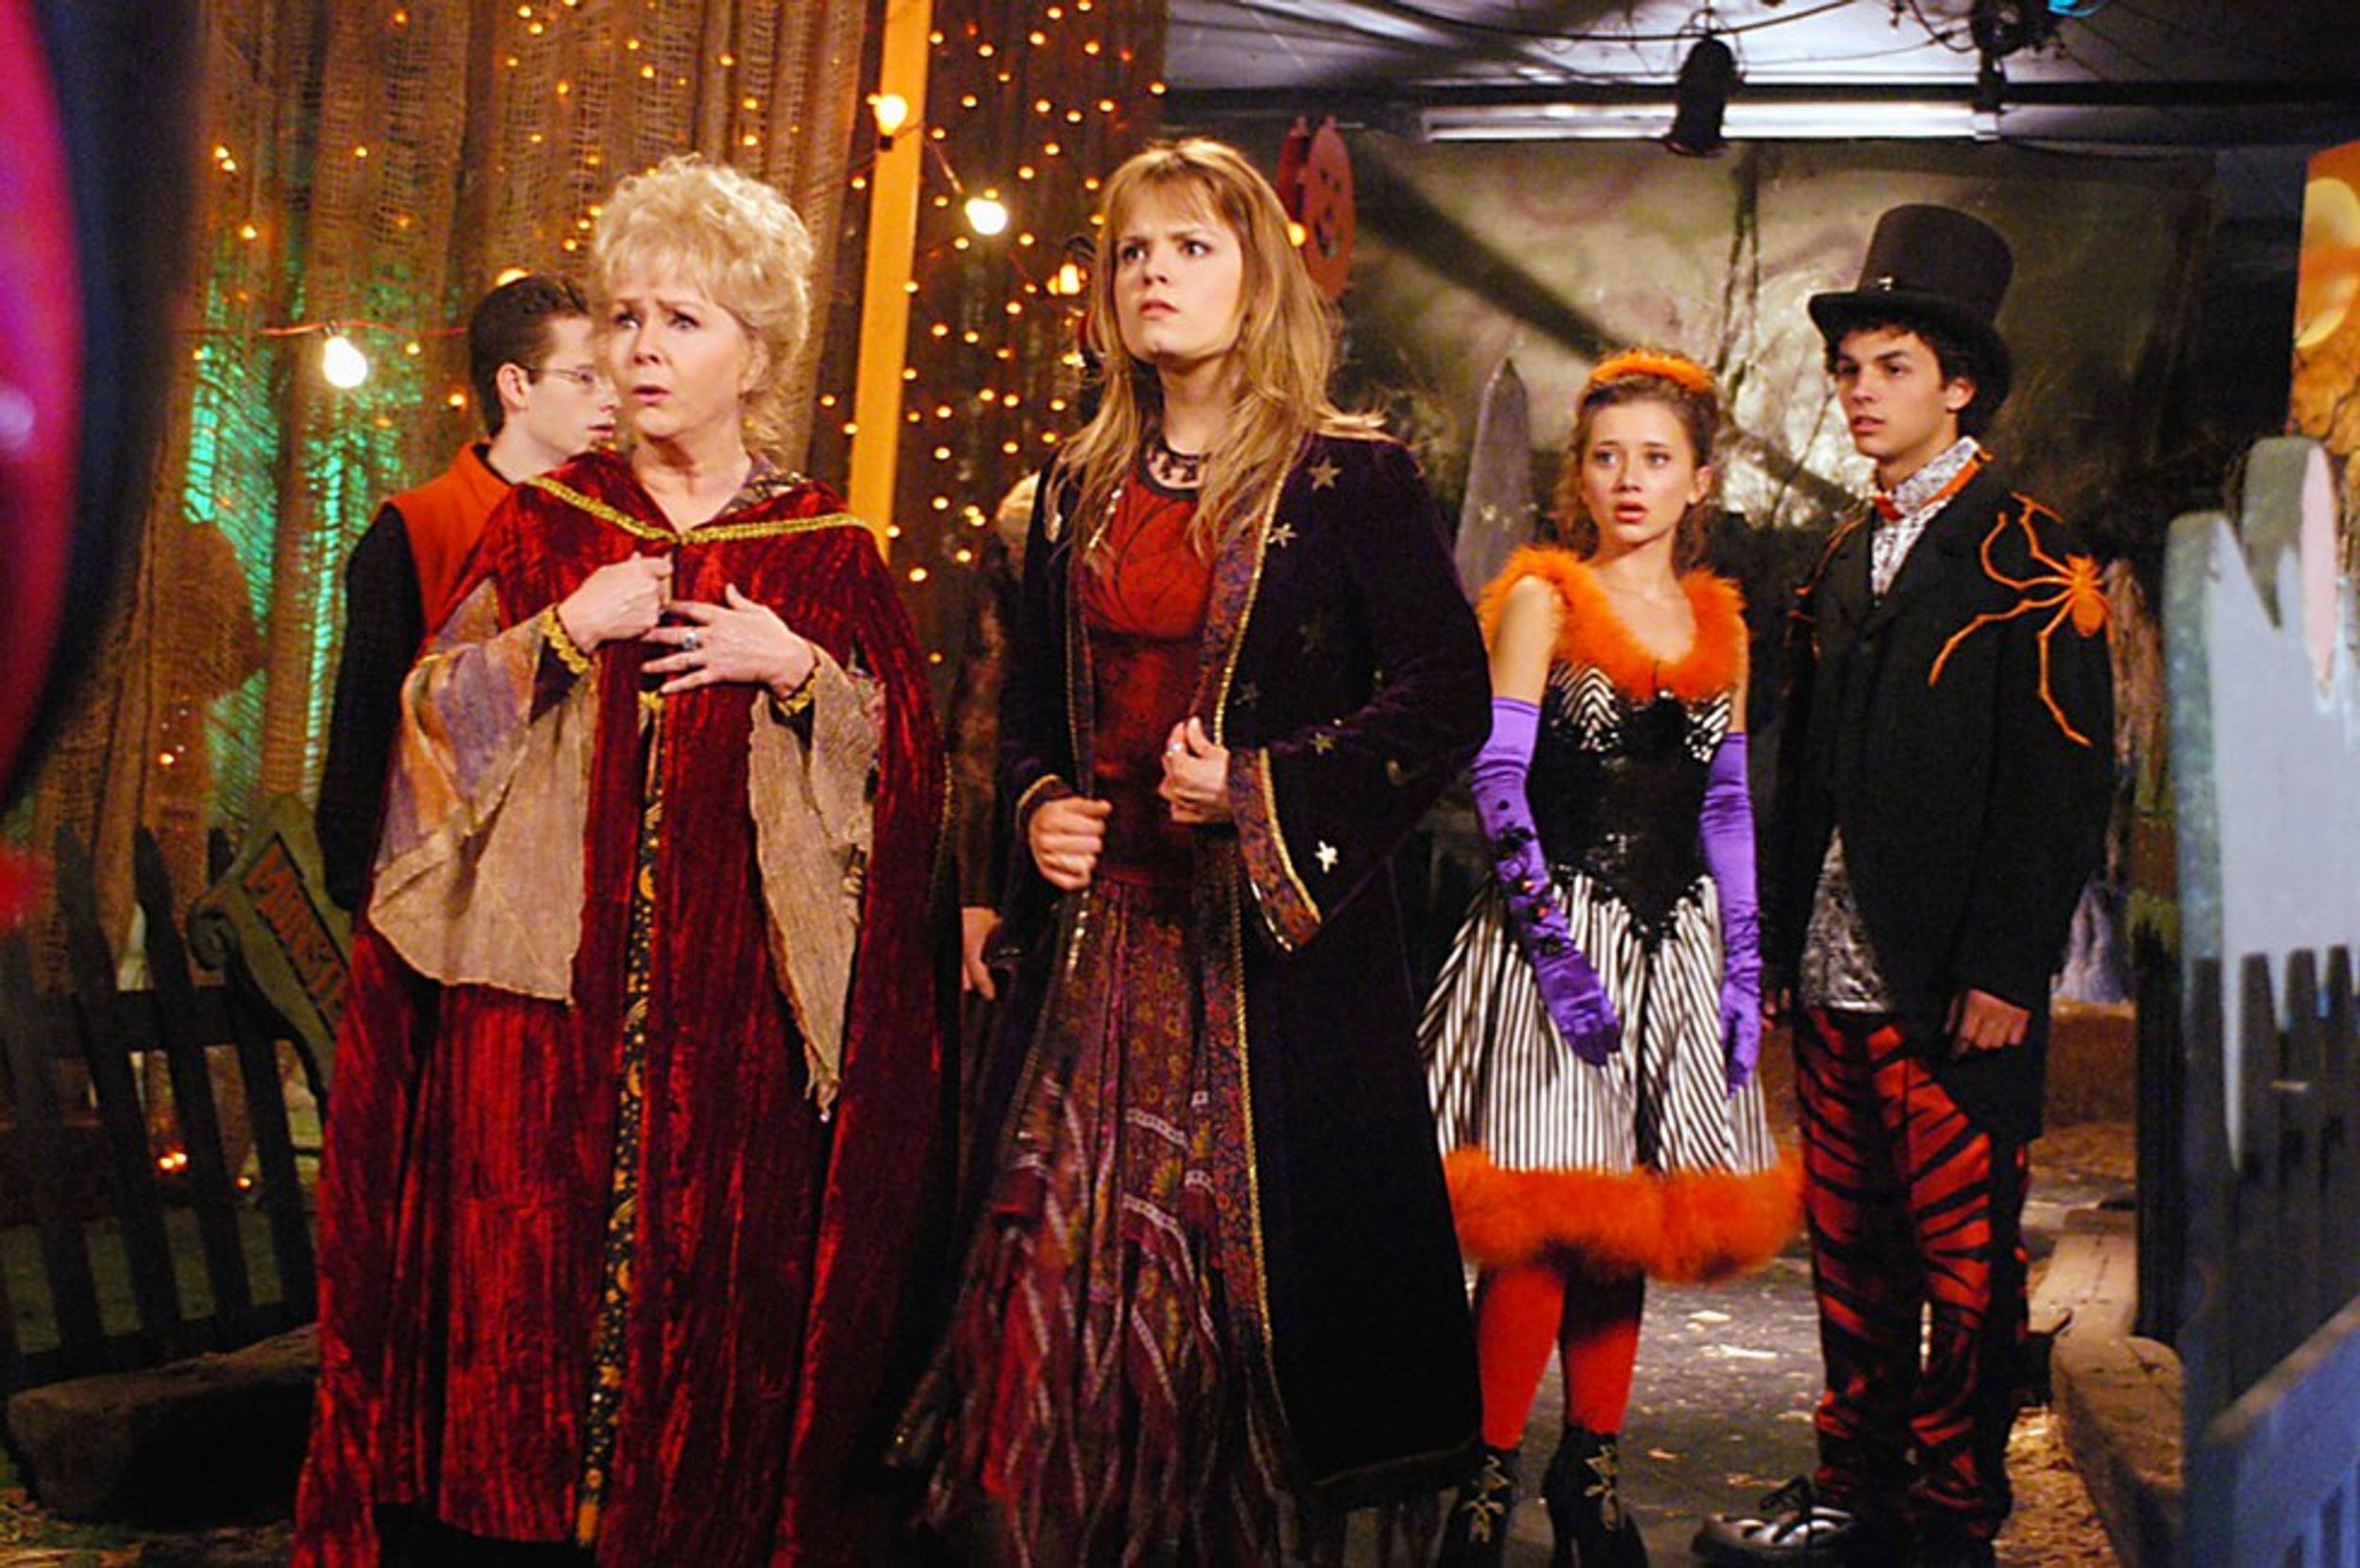 11 Reasons Why Living In 'Halloweentown' Would Be Better Than Real Life